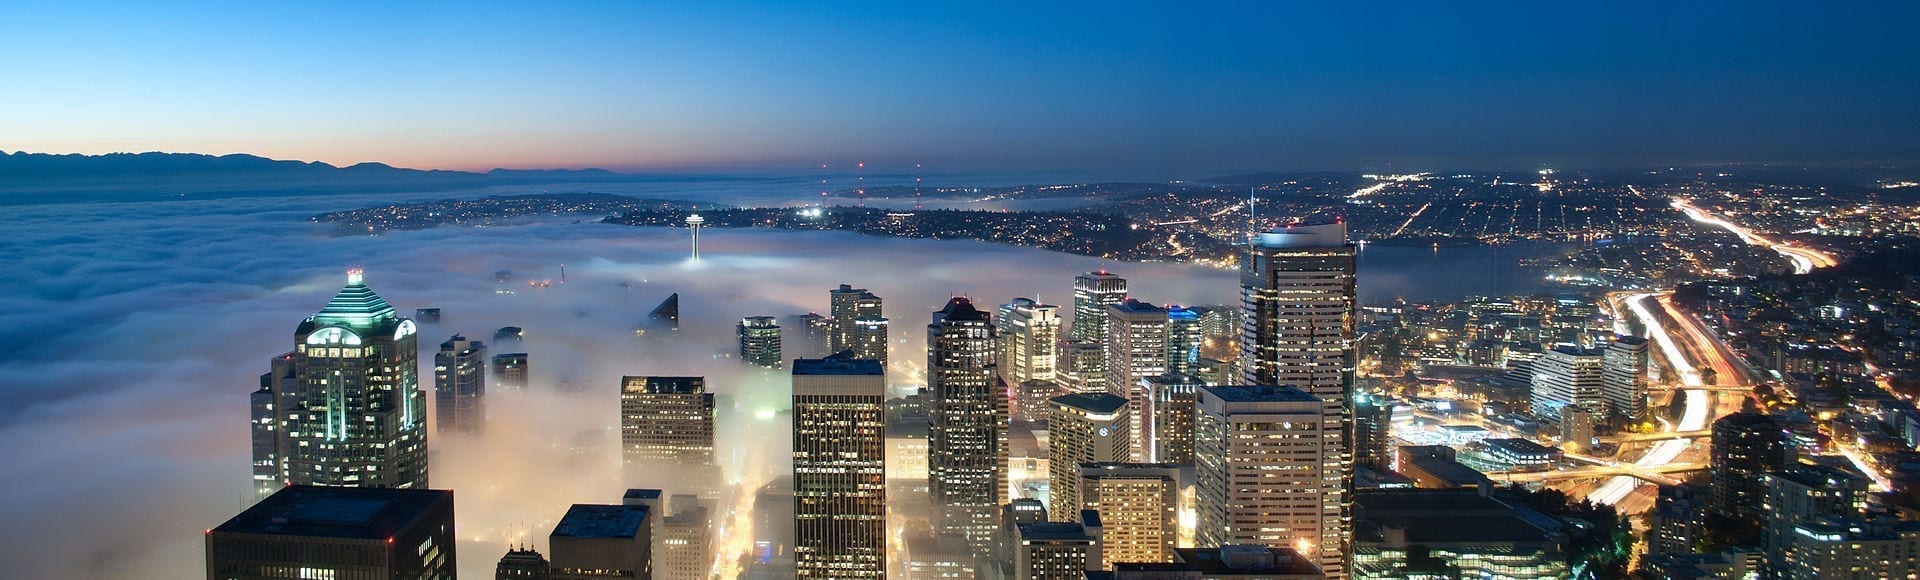 A nighttime view of downtown Seattle with its high-raise buildings partially obscured by fog